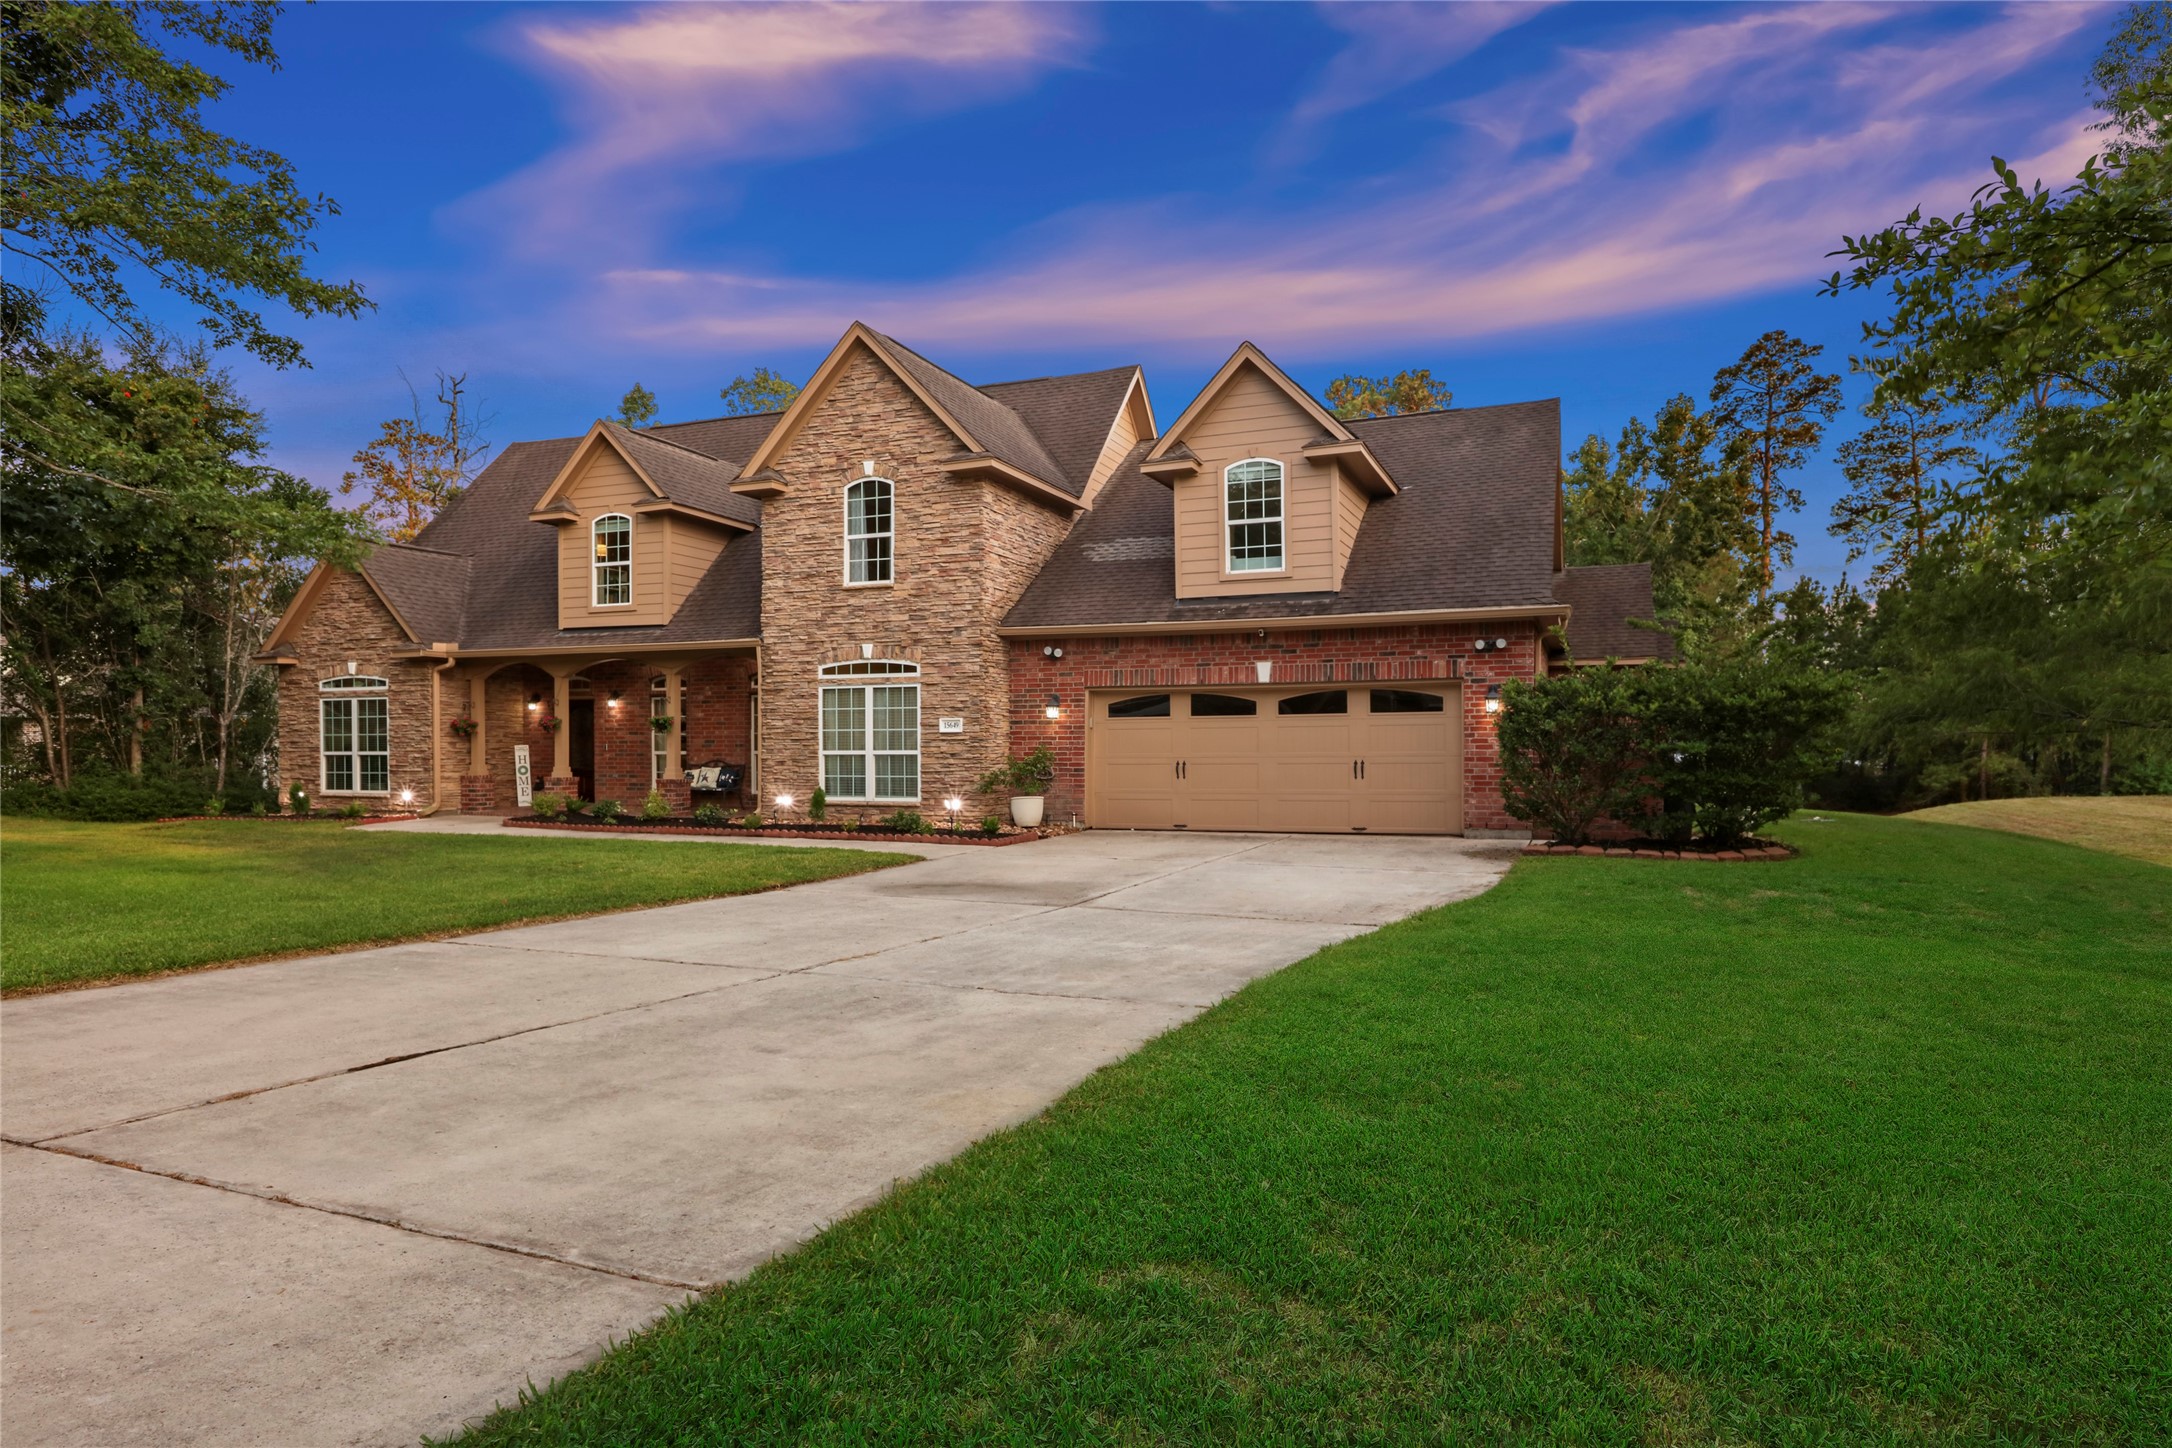 Gorgeous custom home on nearly 3 acres in gated community, MISD, low tax rate, close to Lake Conroe.